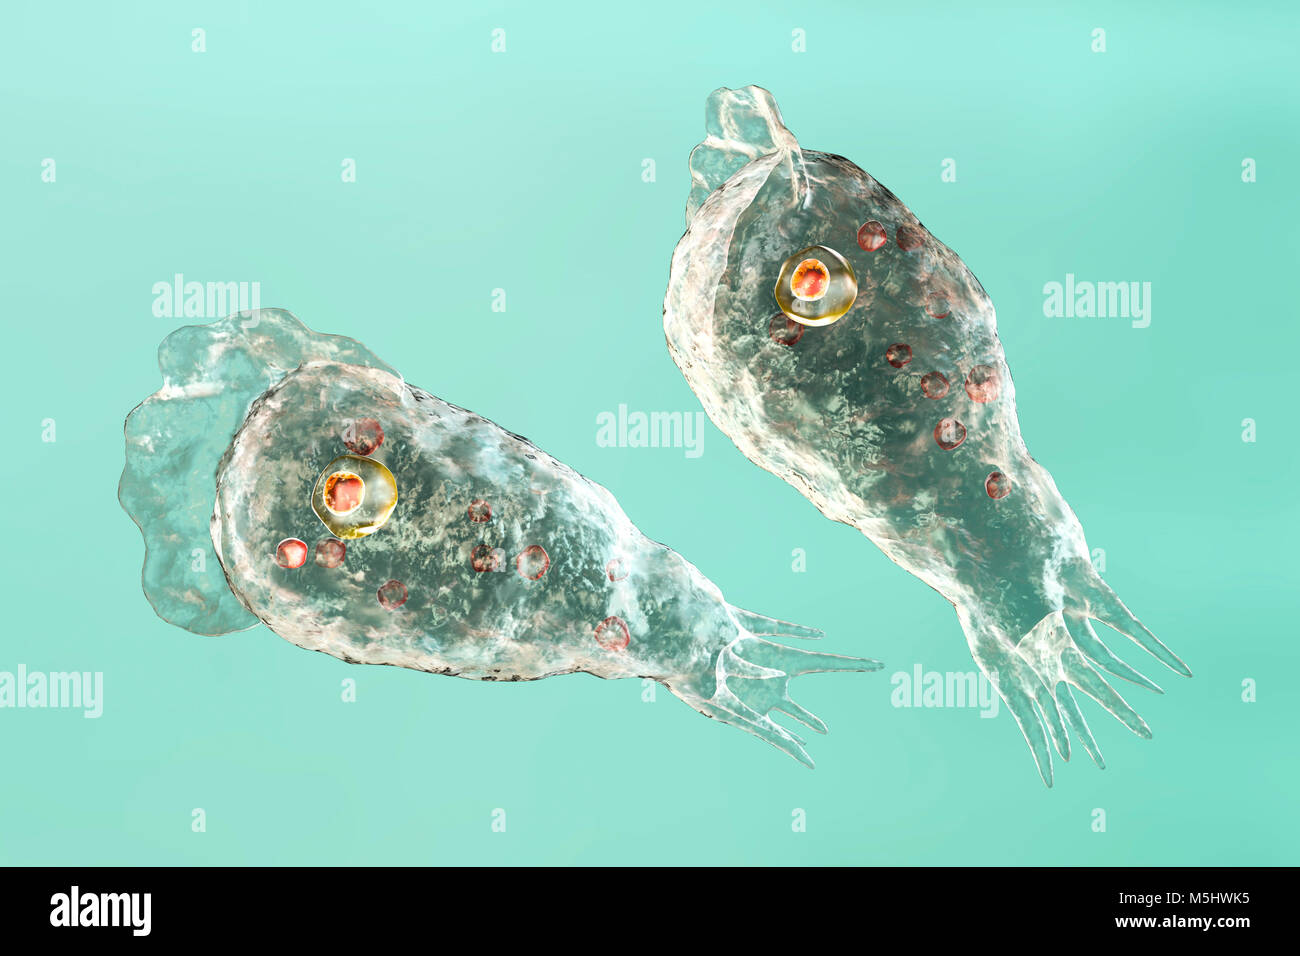 Brain-eating amoeba Naegleria fowleri protozoans in trophozite form, computer illustration. This organism is an opportunistic pathogen of humans, causing meningoencephalitis (inflammation of the brain and its surrounding membranes) when inhaled, often by children swimming in fresh water. Headaches, vomiting, sensory disturbance and a fatal coma may occur if the victim is not treated. Treatment is with antiprotozoal drugs. Infectious stage for humans are trophozoites and flagellate form. Stock Photo